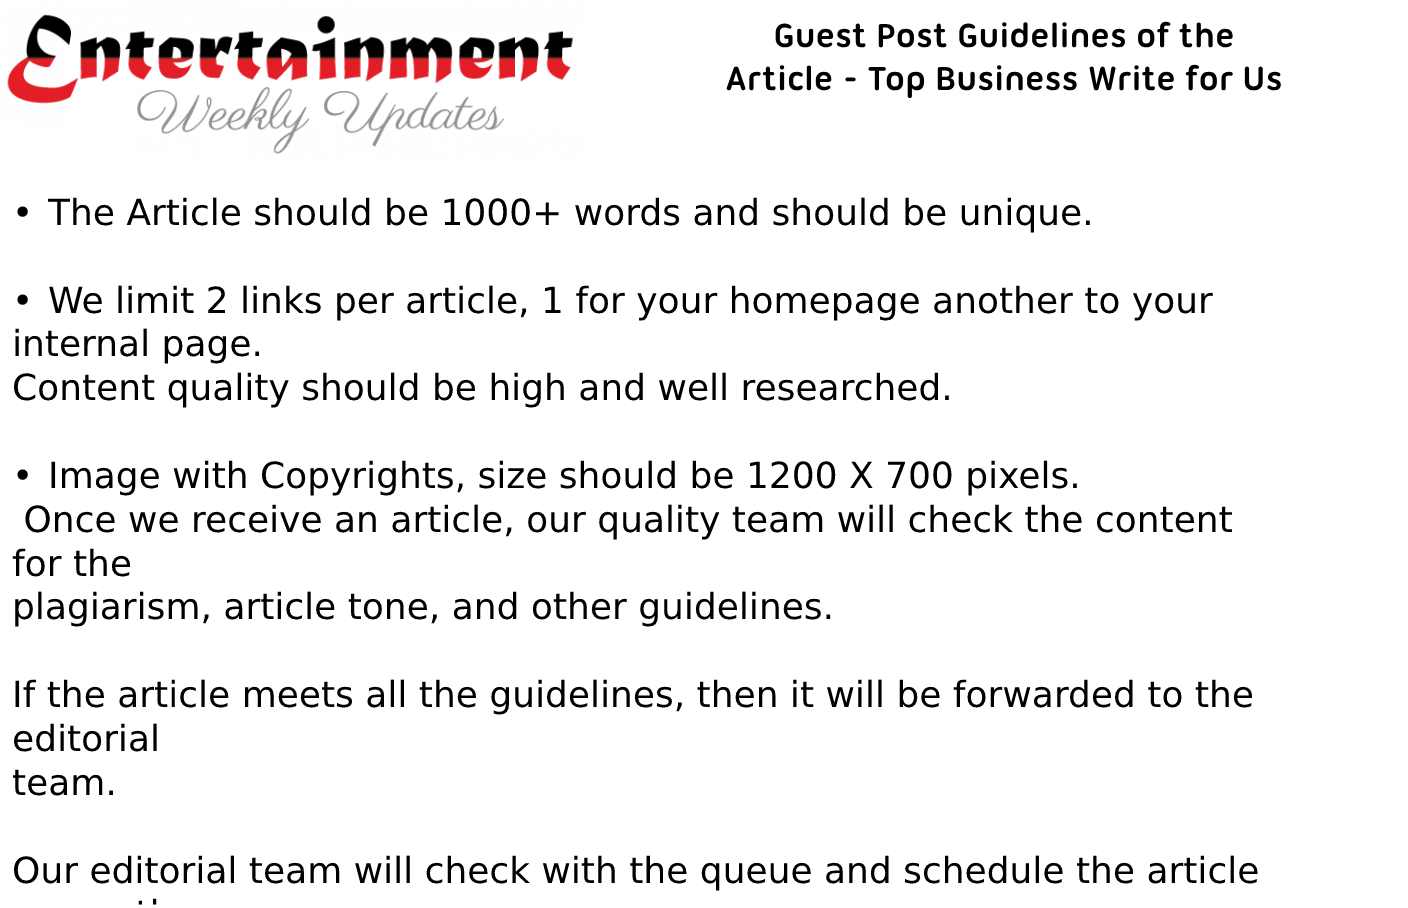 Guidelines of the Article – Top Business Write for Us